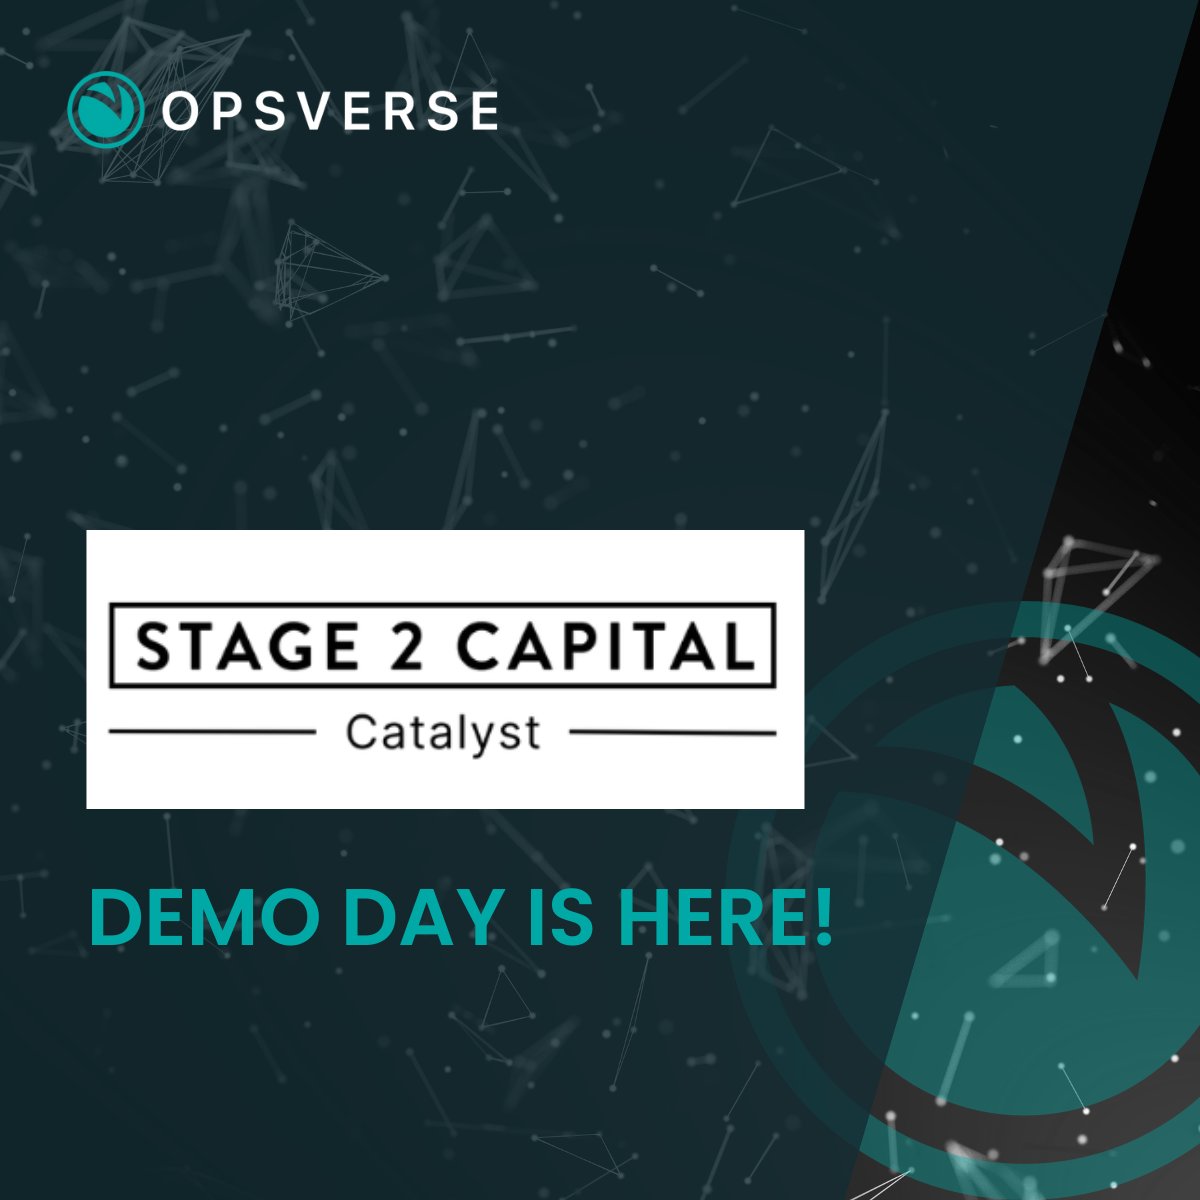 OpsVerse is thrilled to be a part of Stage2 Capital's Catalyst Cohort, and we can't wait for the Demo Day on October 25th to showcase the OpsVerse story. Thanks to @Stage2Capital for their incredible support! #OpsVerse #CatalystCohort #DemoDay #innovation